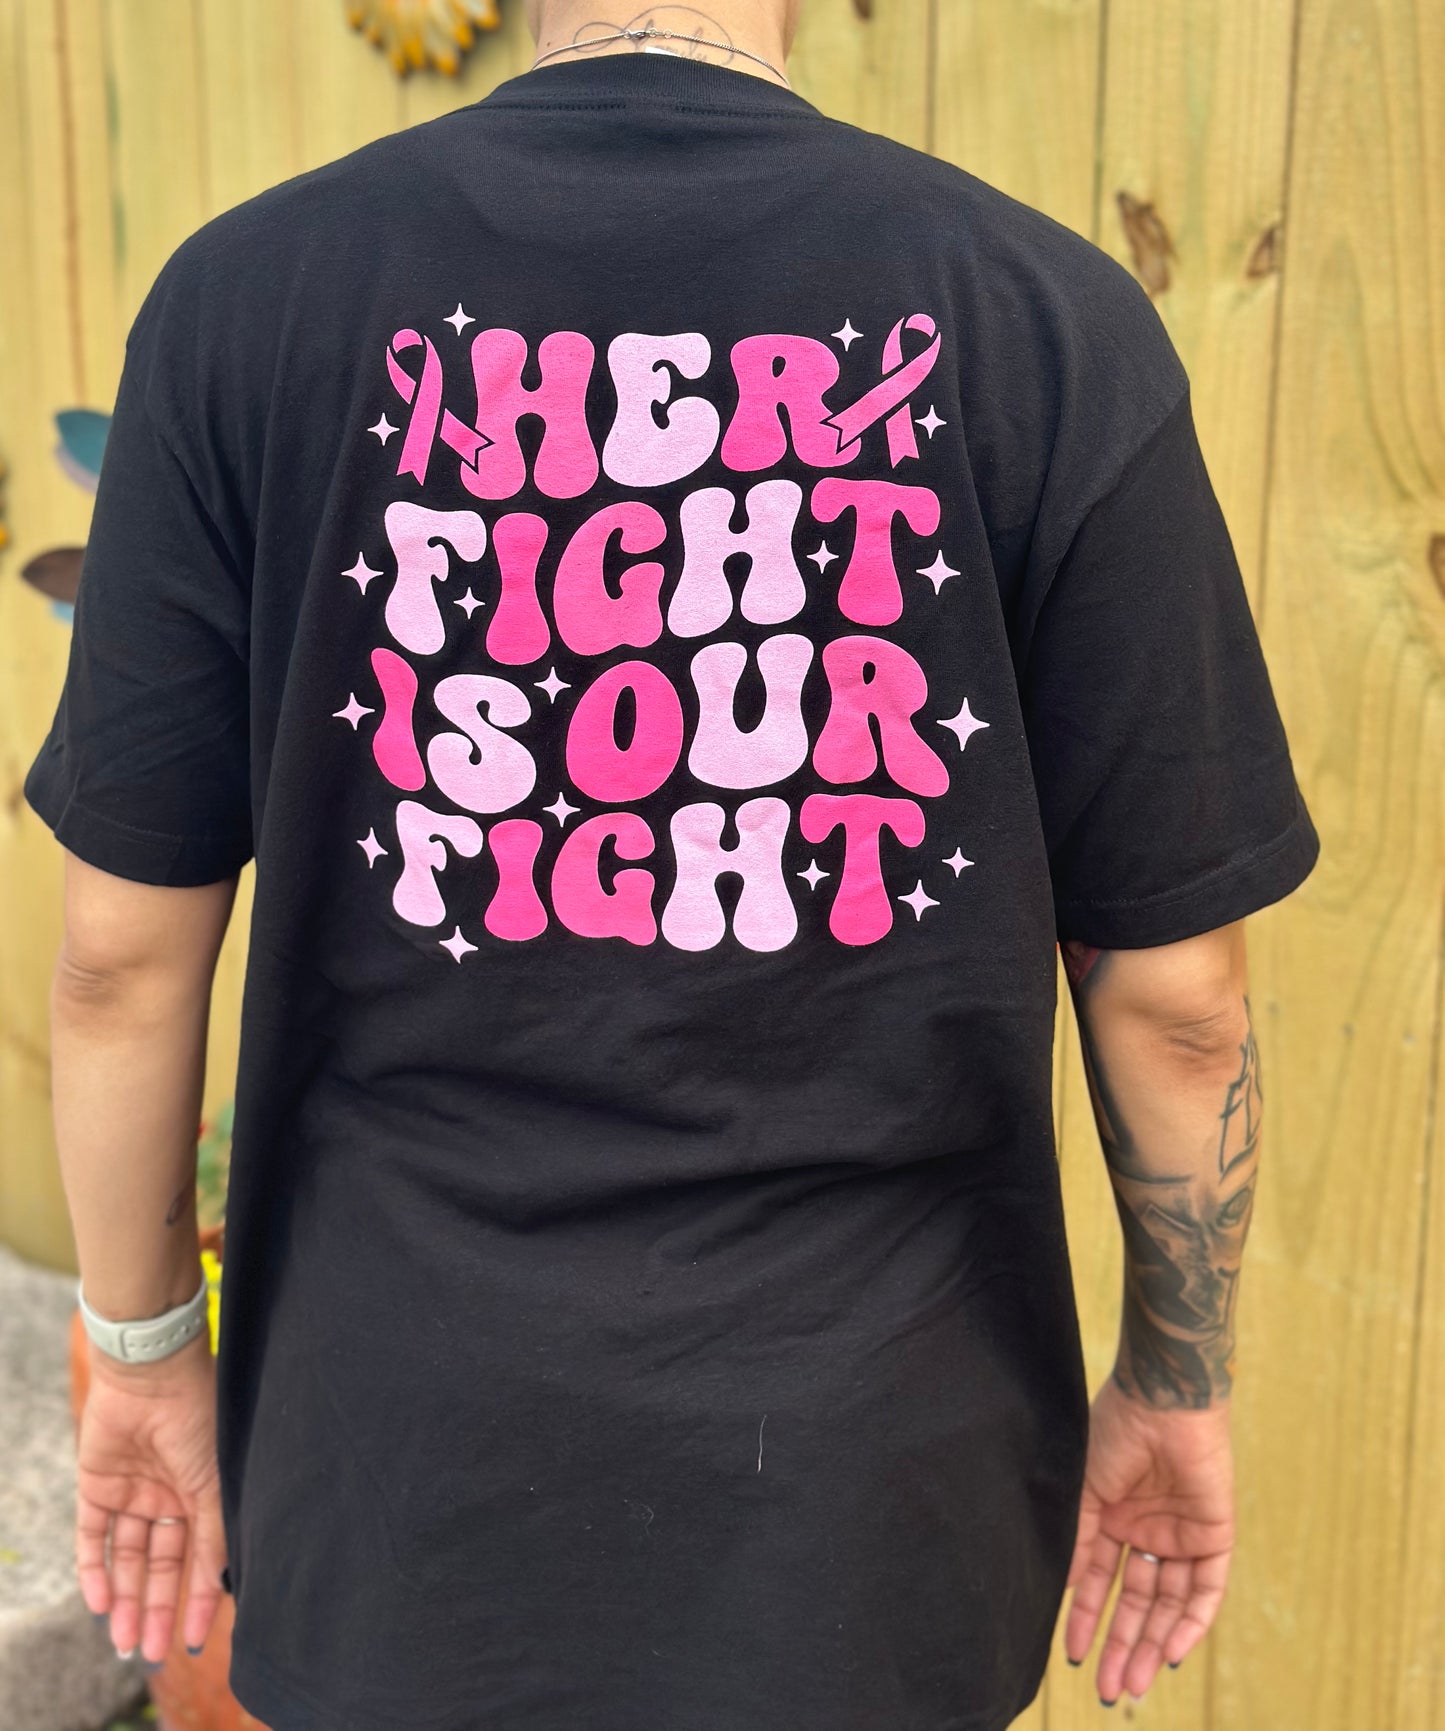 Her Fight Breast Cancer Tee • Breast Cancer Benefit